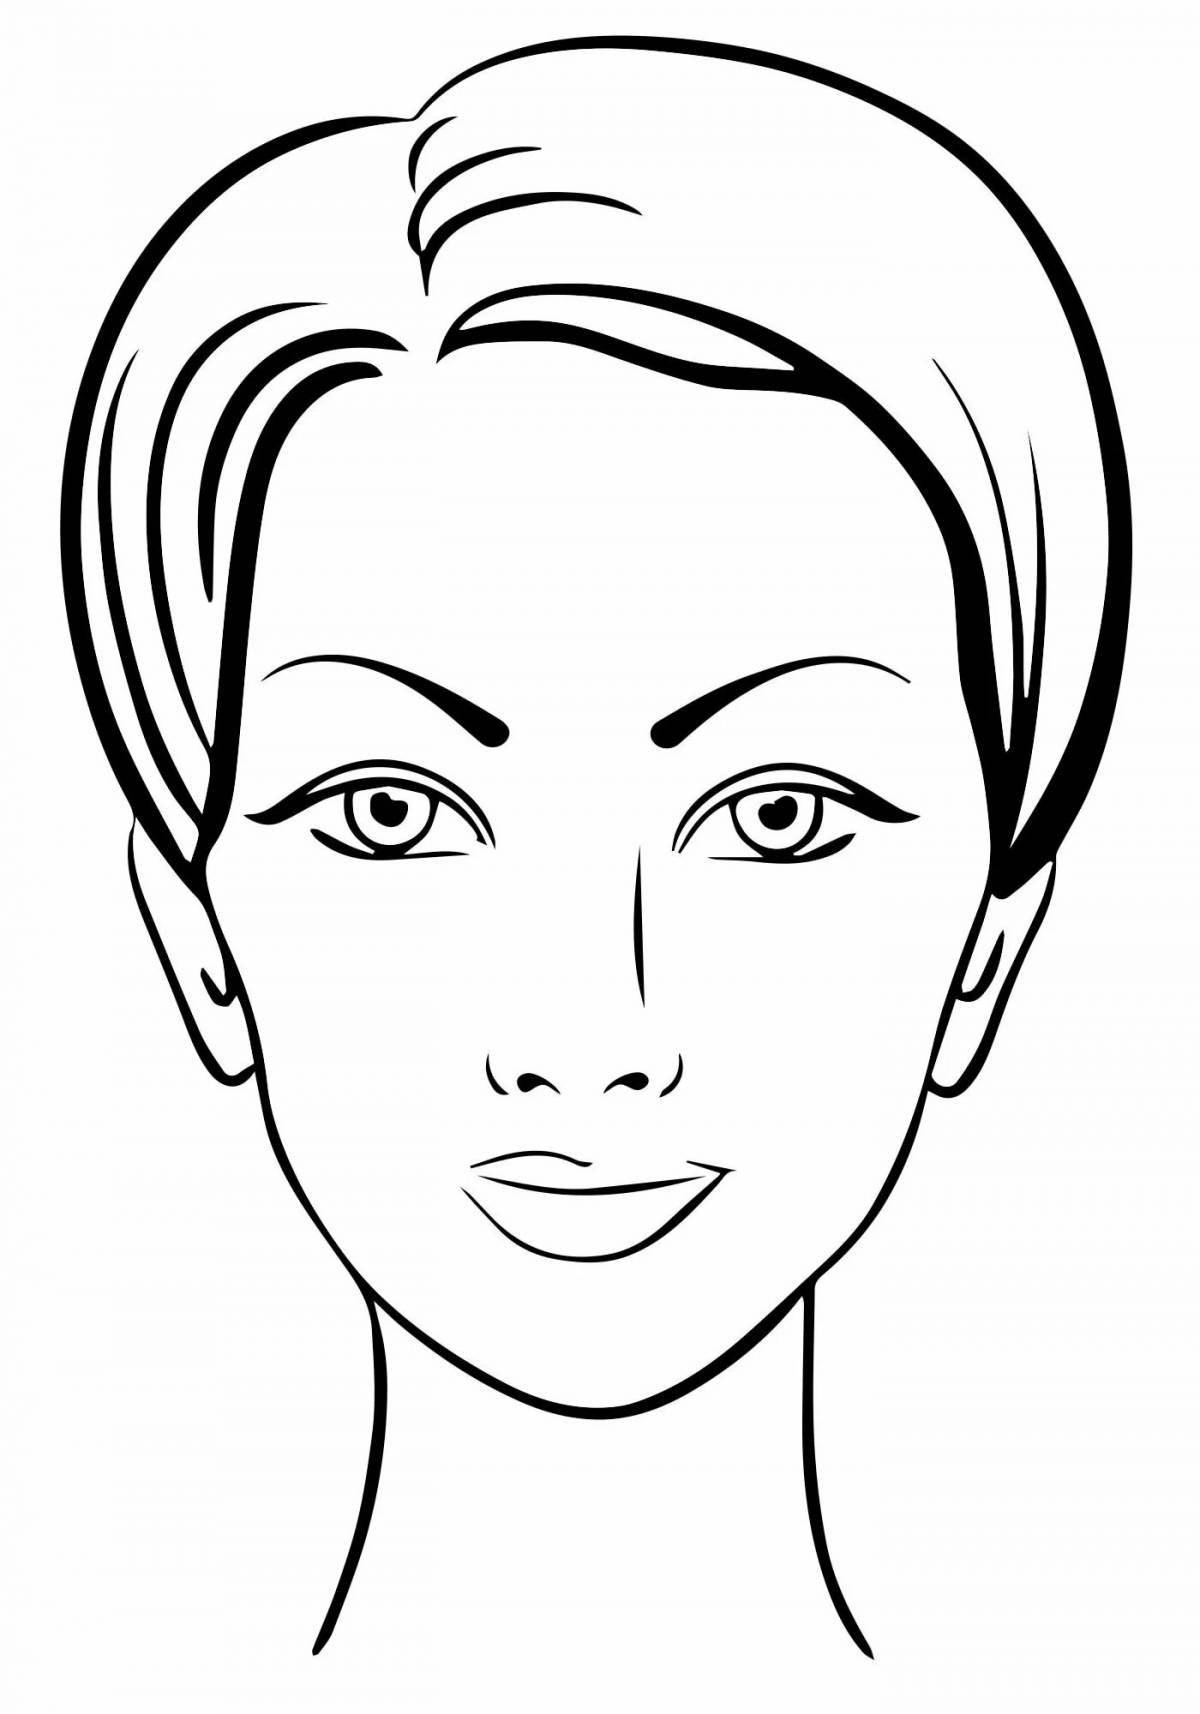 Colourful female face coloring book for kids